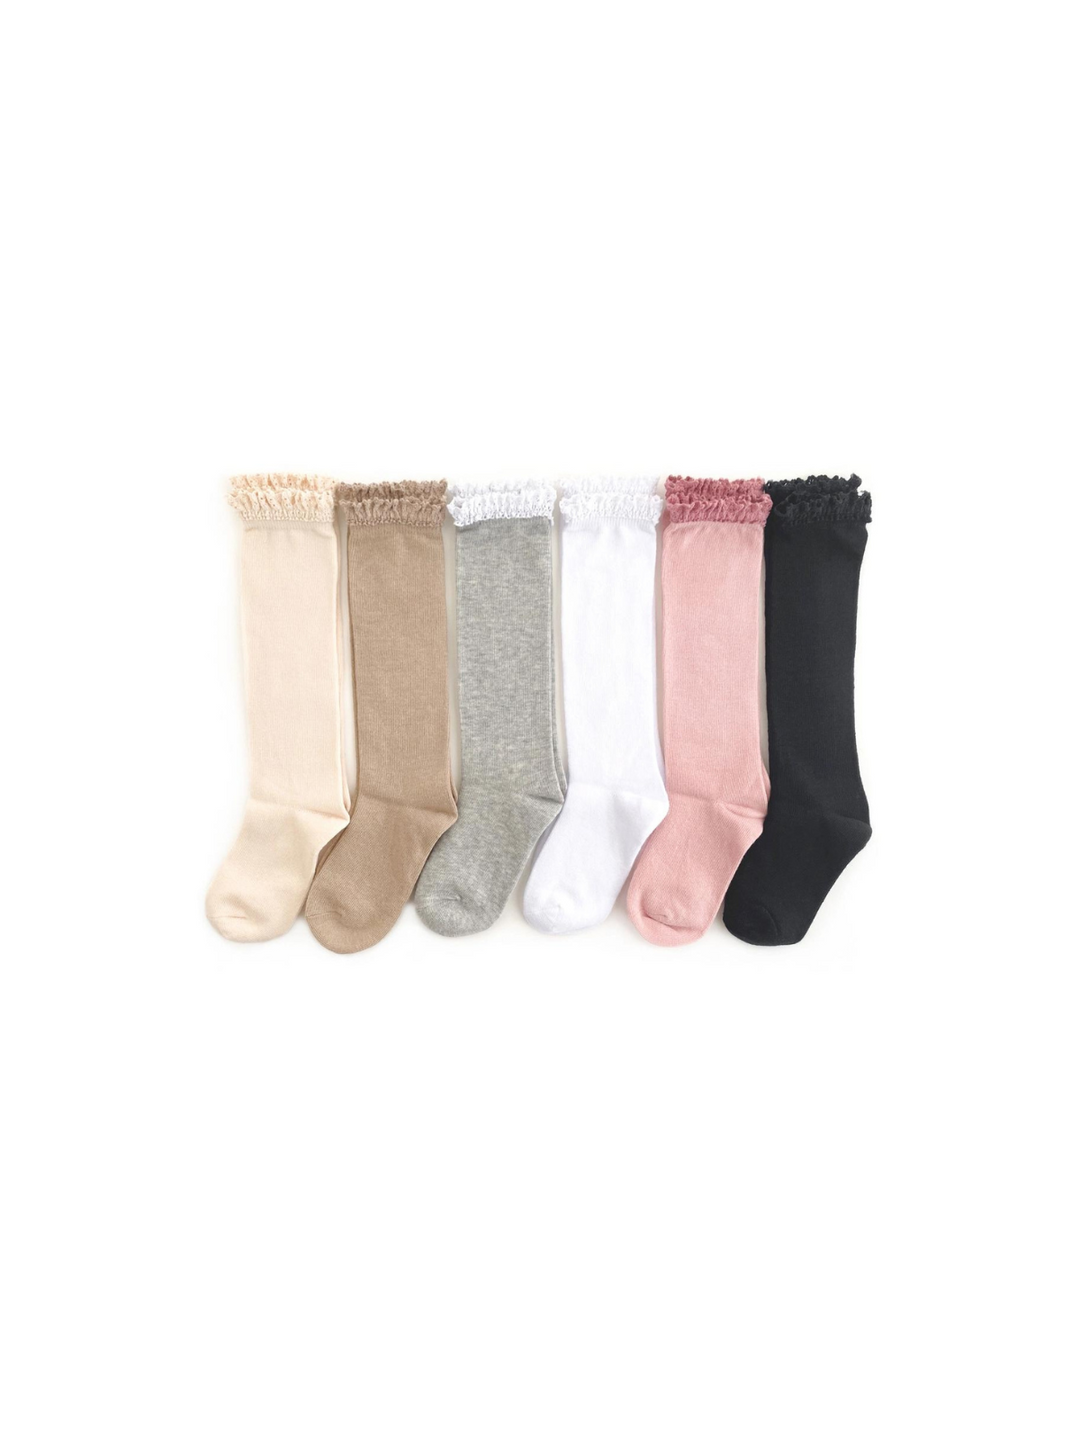 Lace Top Knee High Socks - Gray | Little Stocking Co.